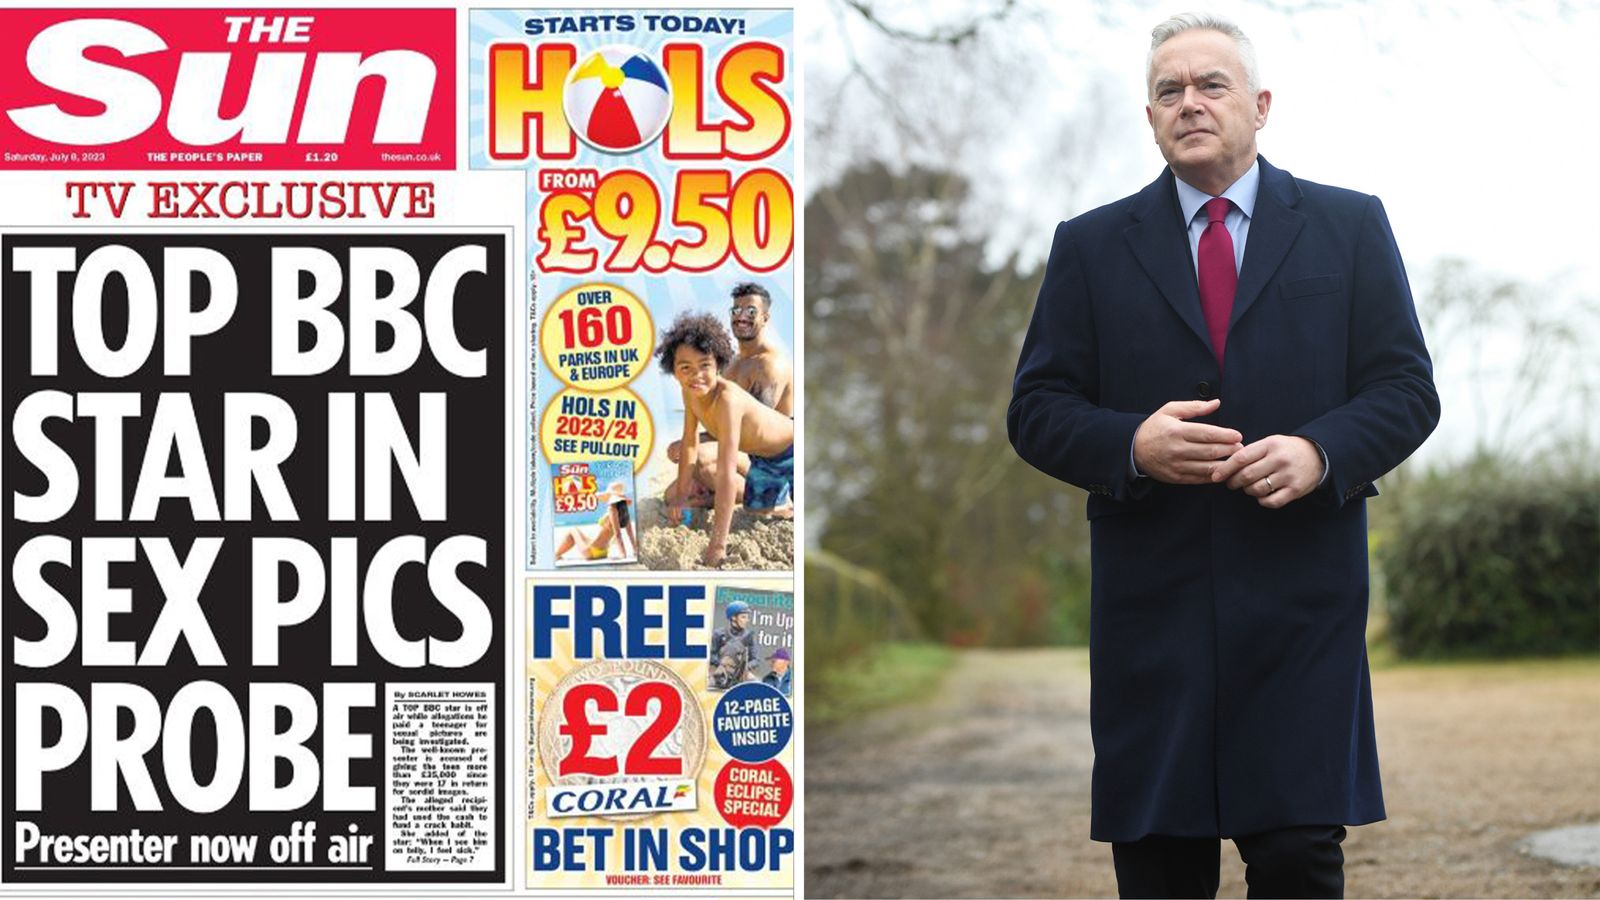 Huw Edwards: Was The Sun right to publish allegations about BBC presenter?